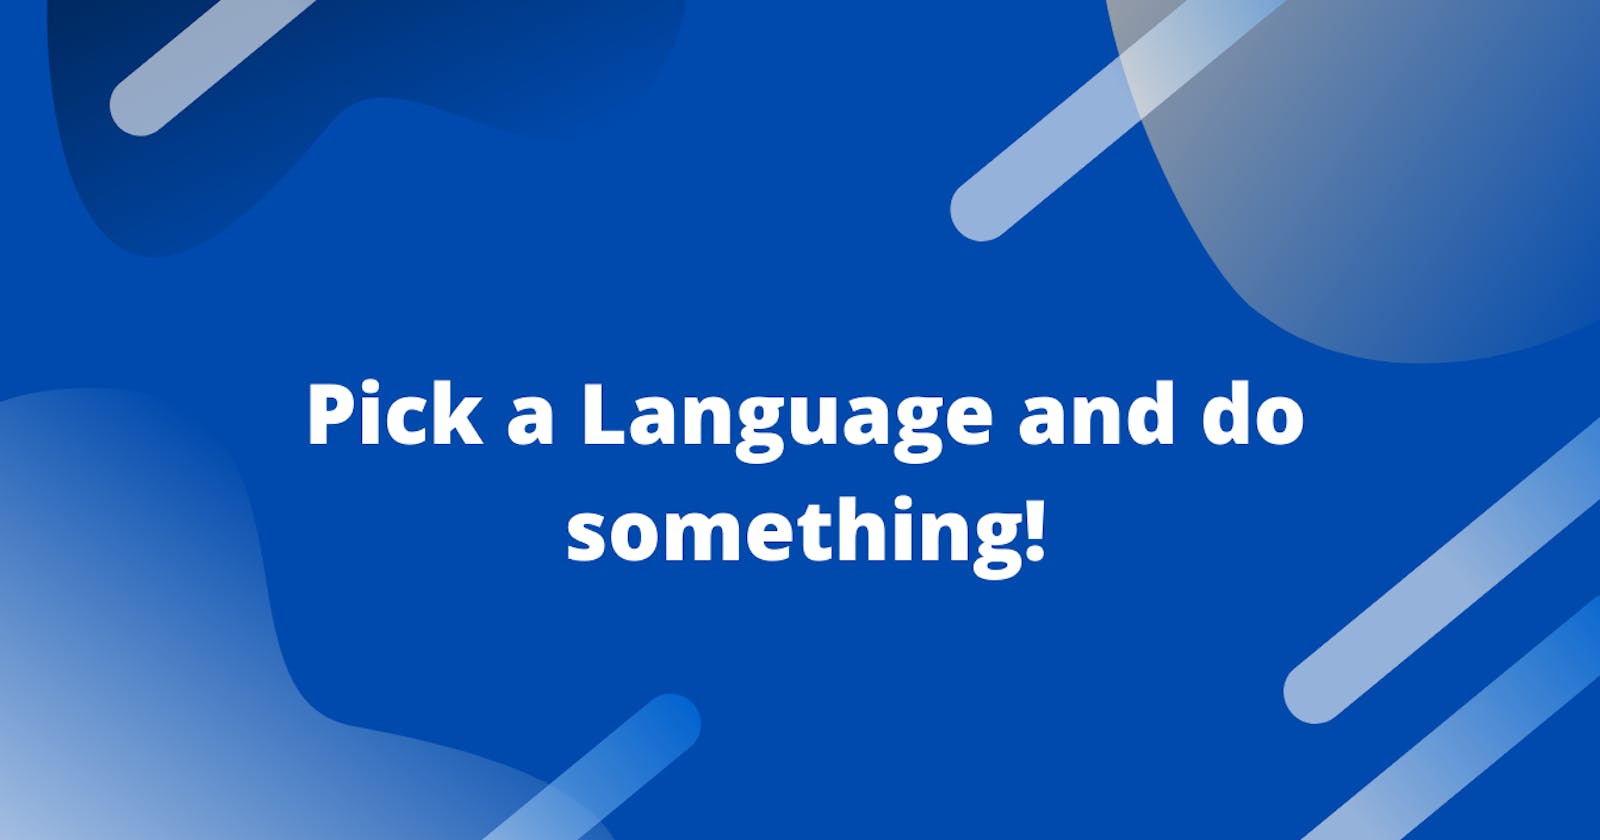 Pick a Language and do something!